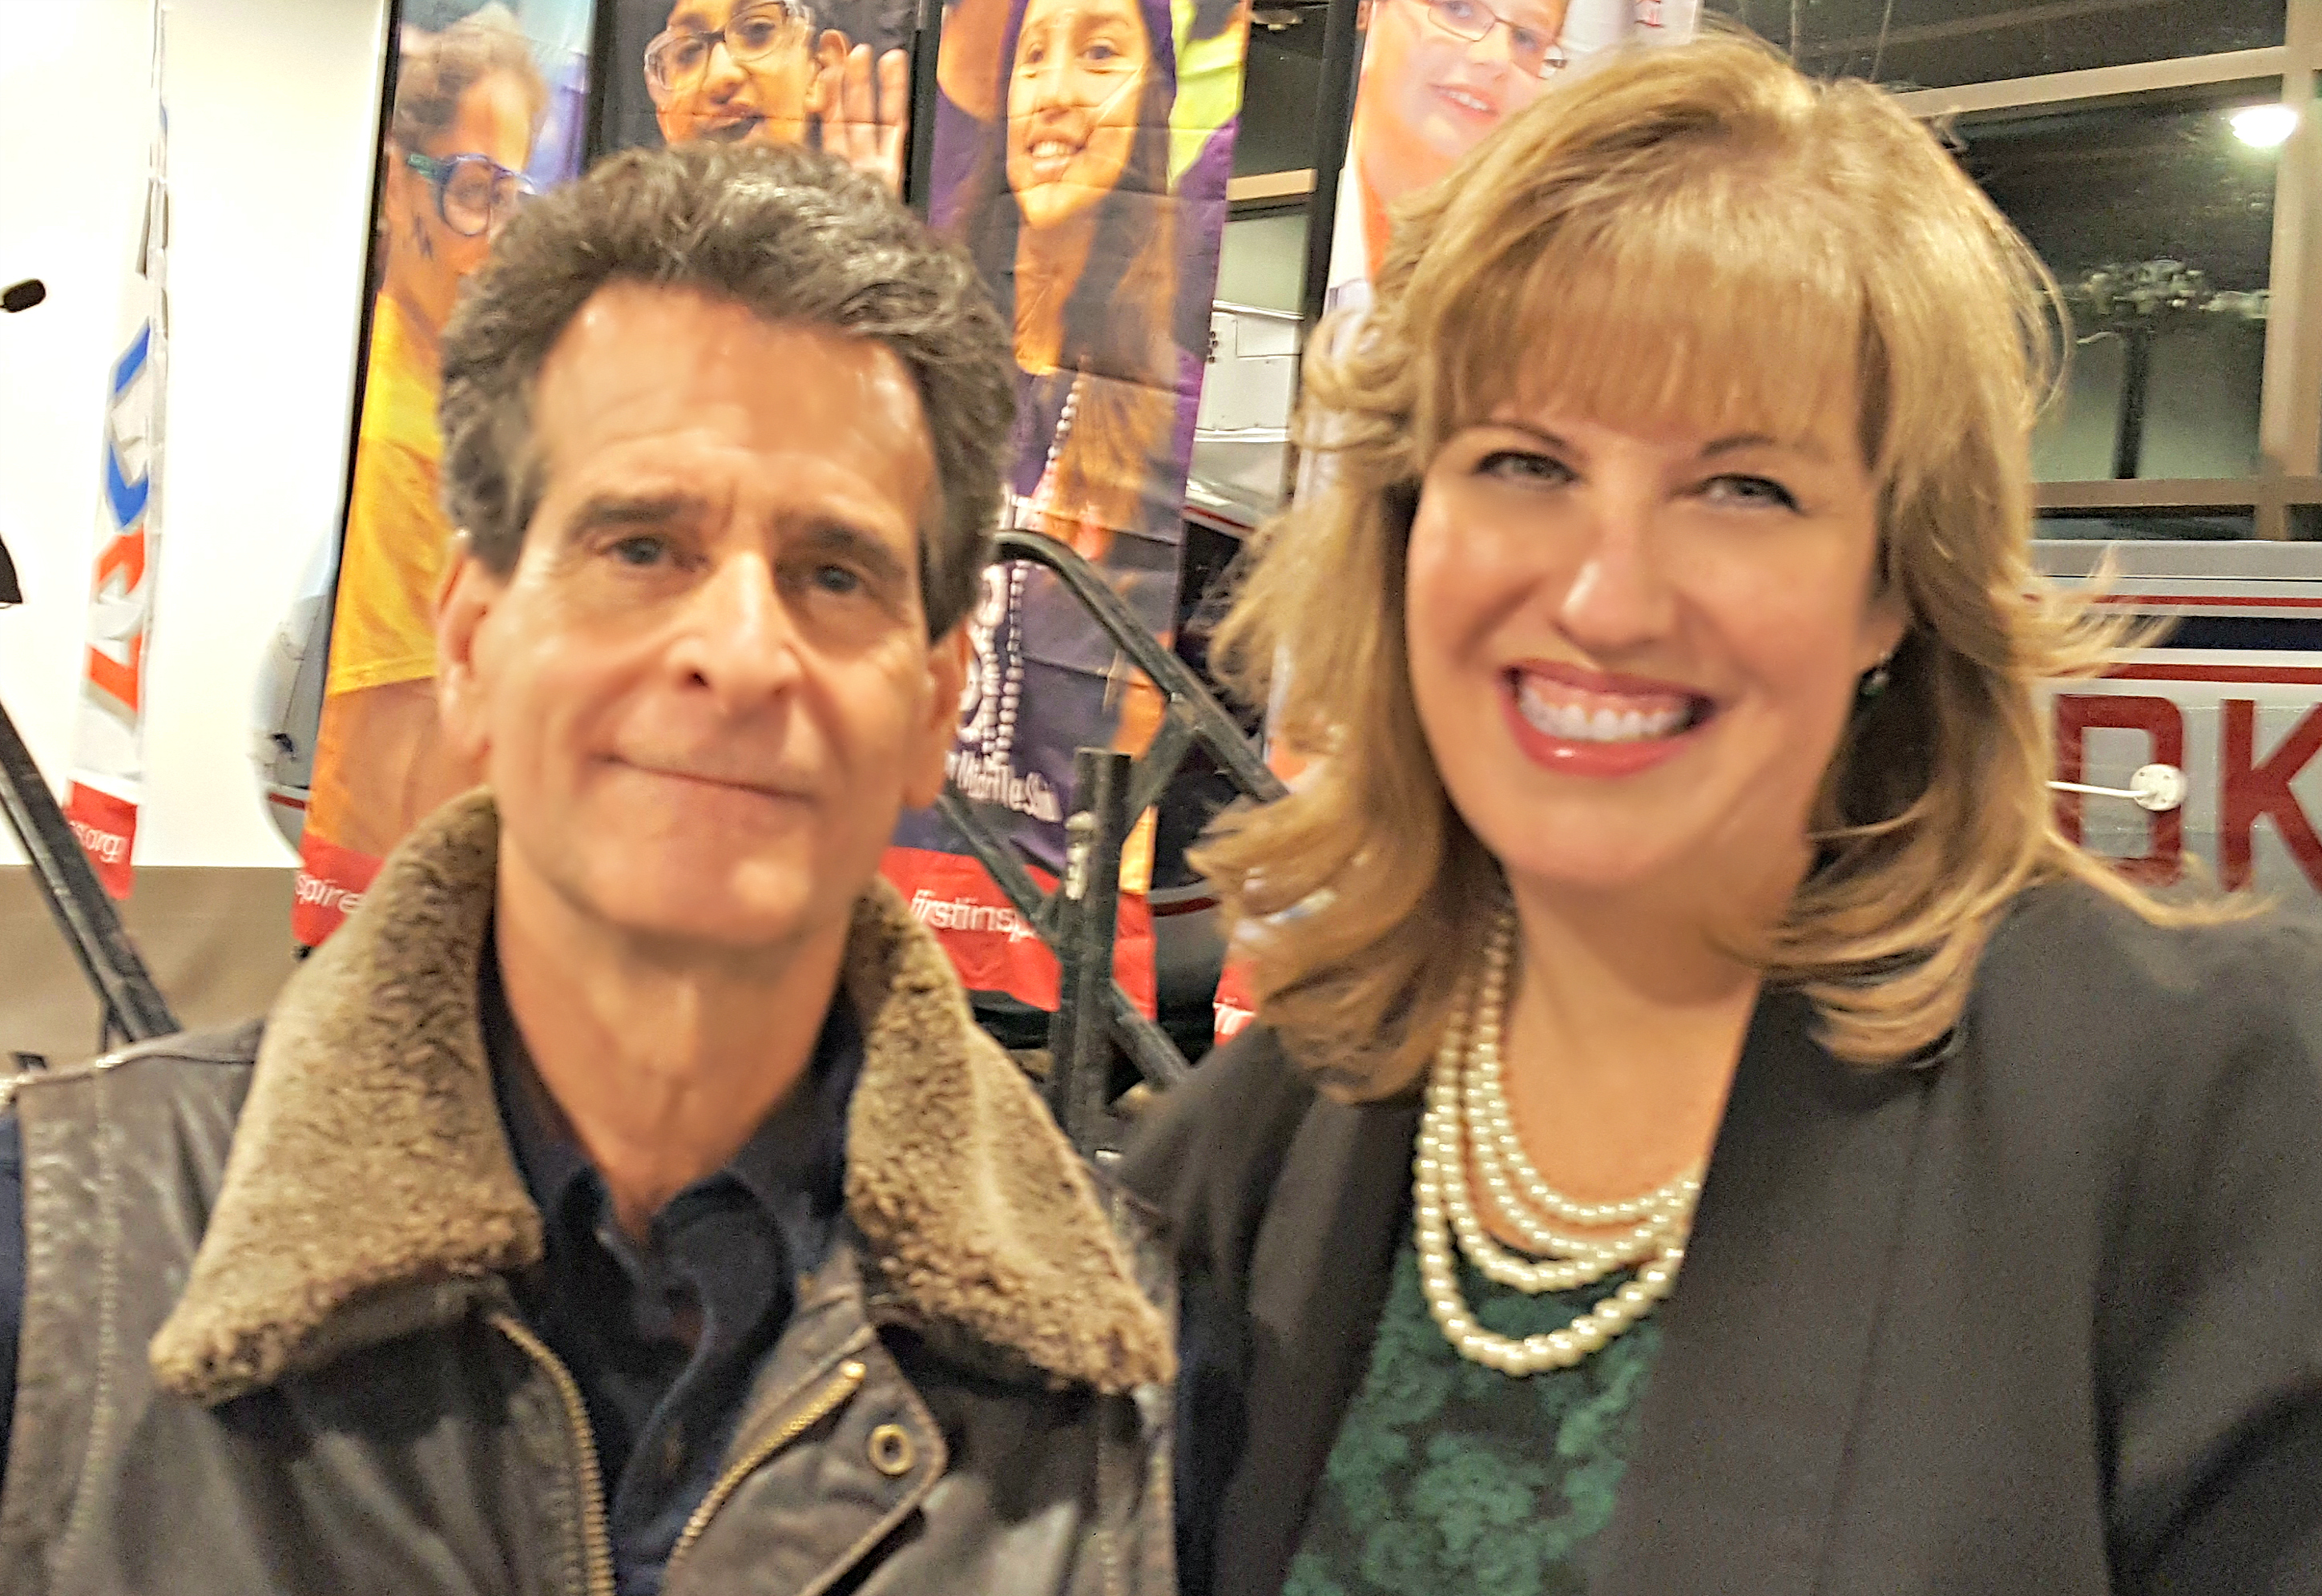 Dean Kamen and Amy, one of our mentors